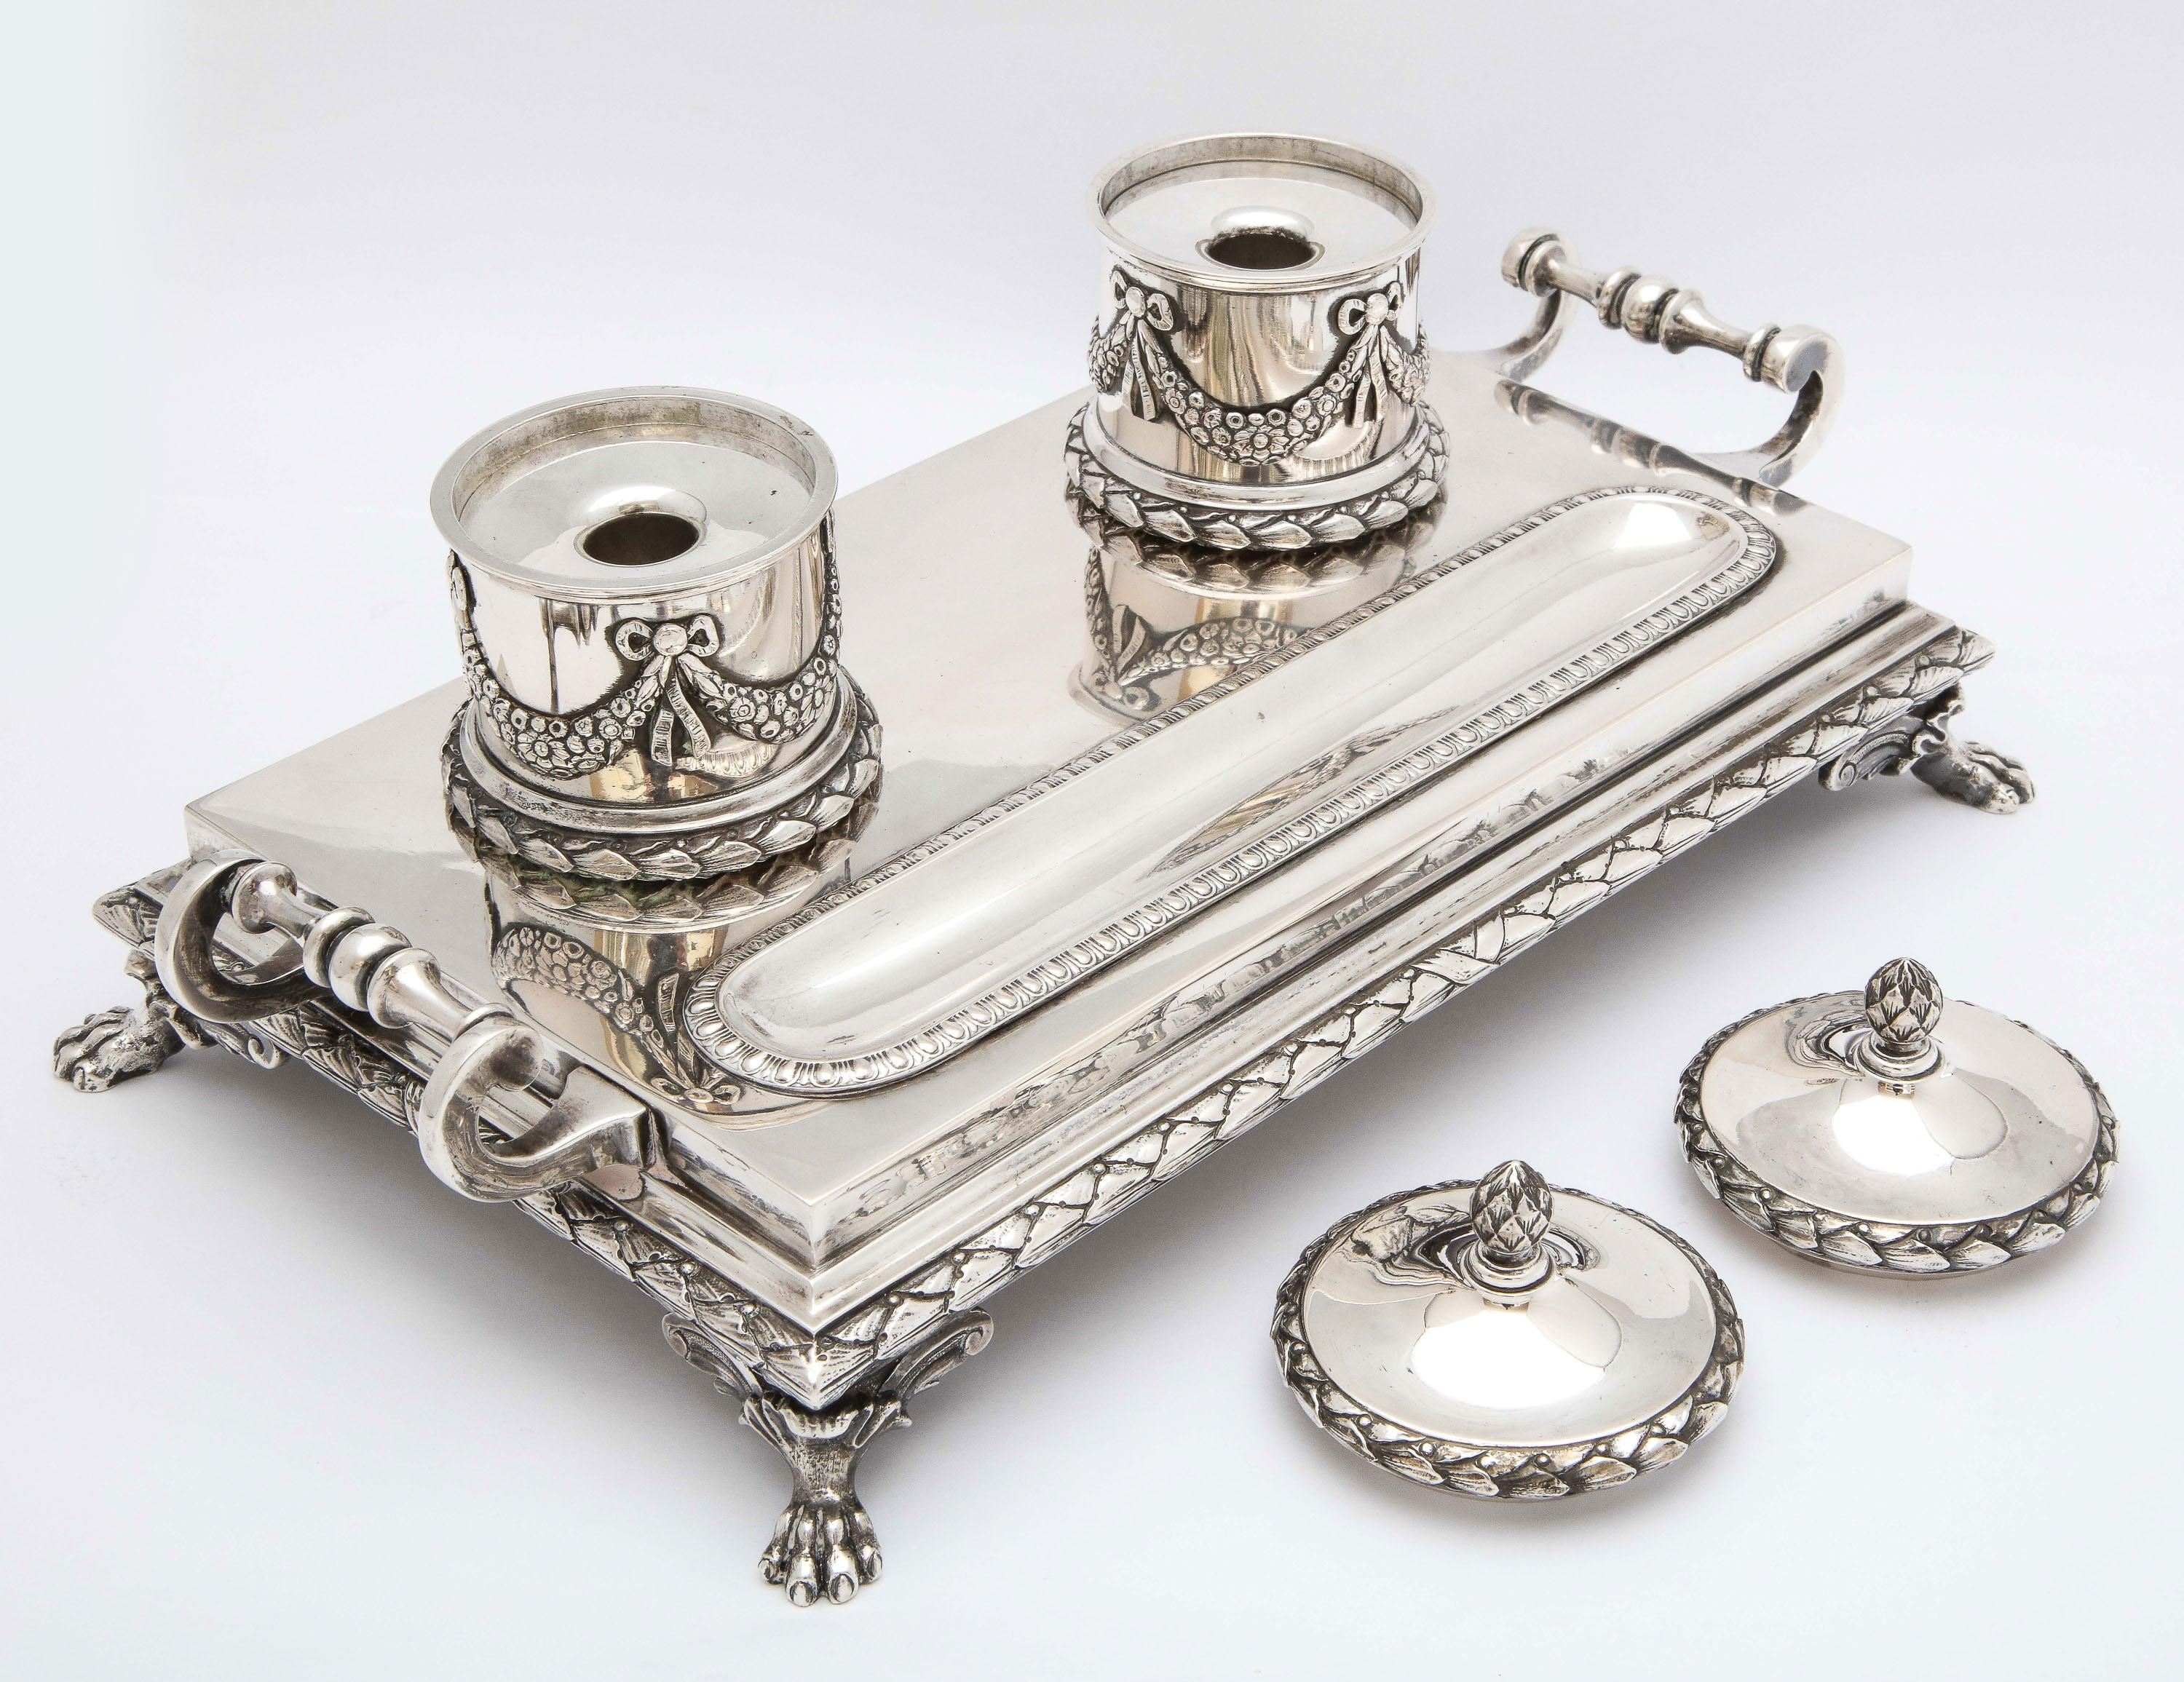 Neoclassical-Style Continental Silver '.800' Footed Double Inkstand by Dragstead For Sale 11